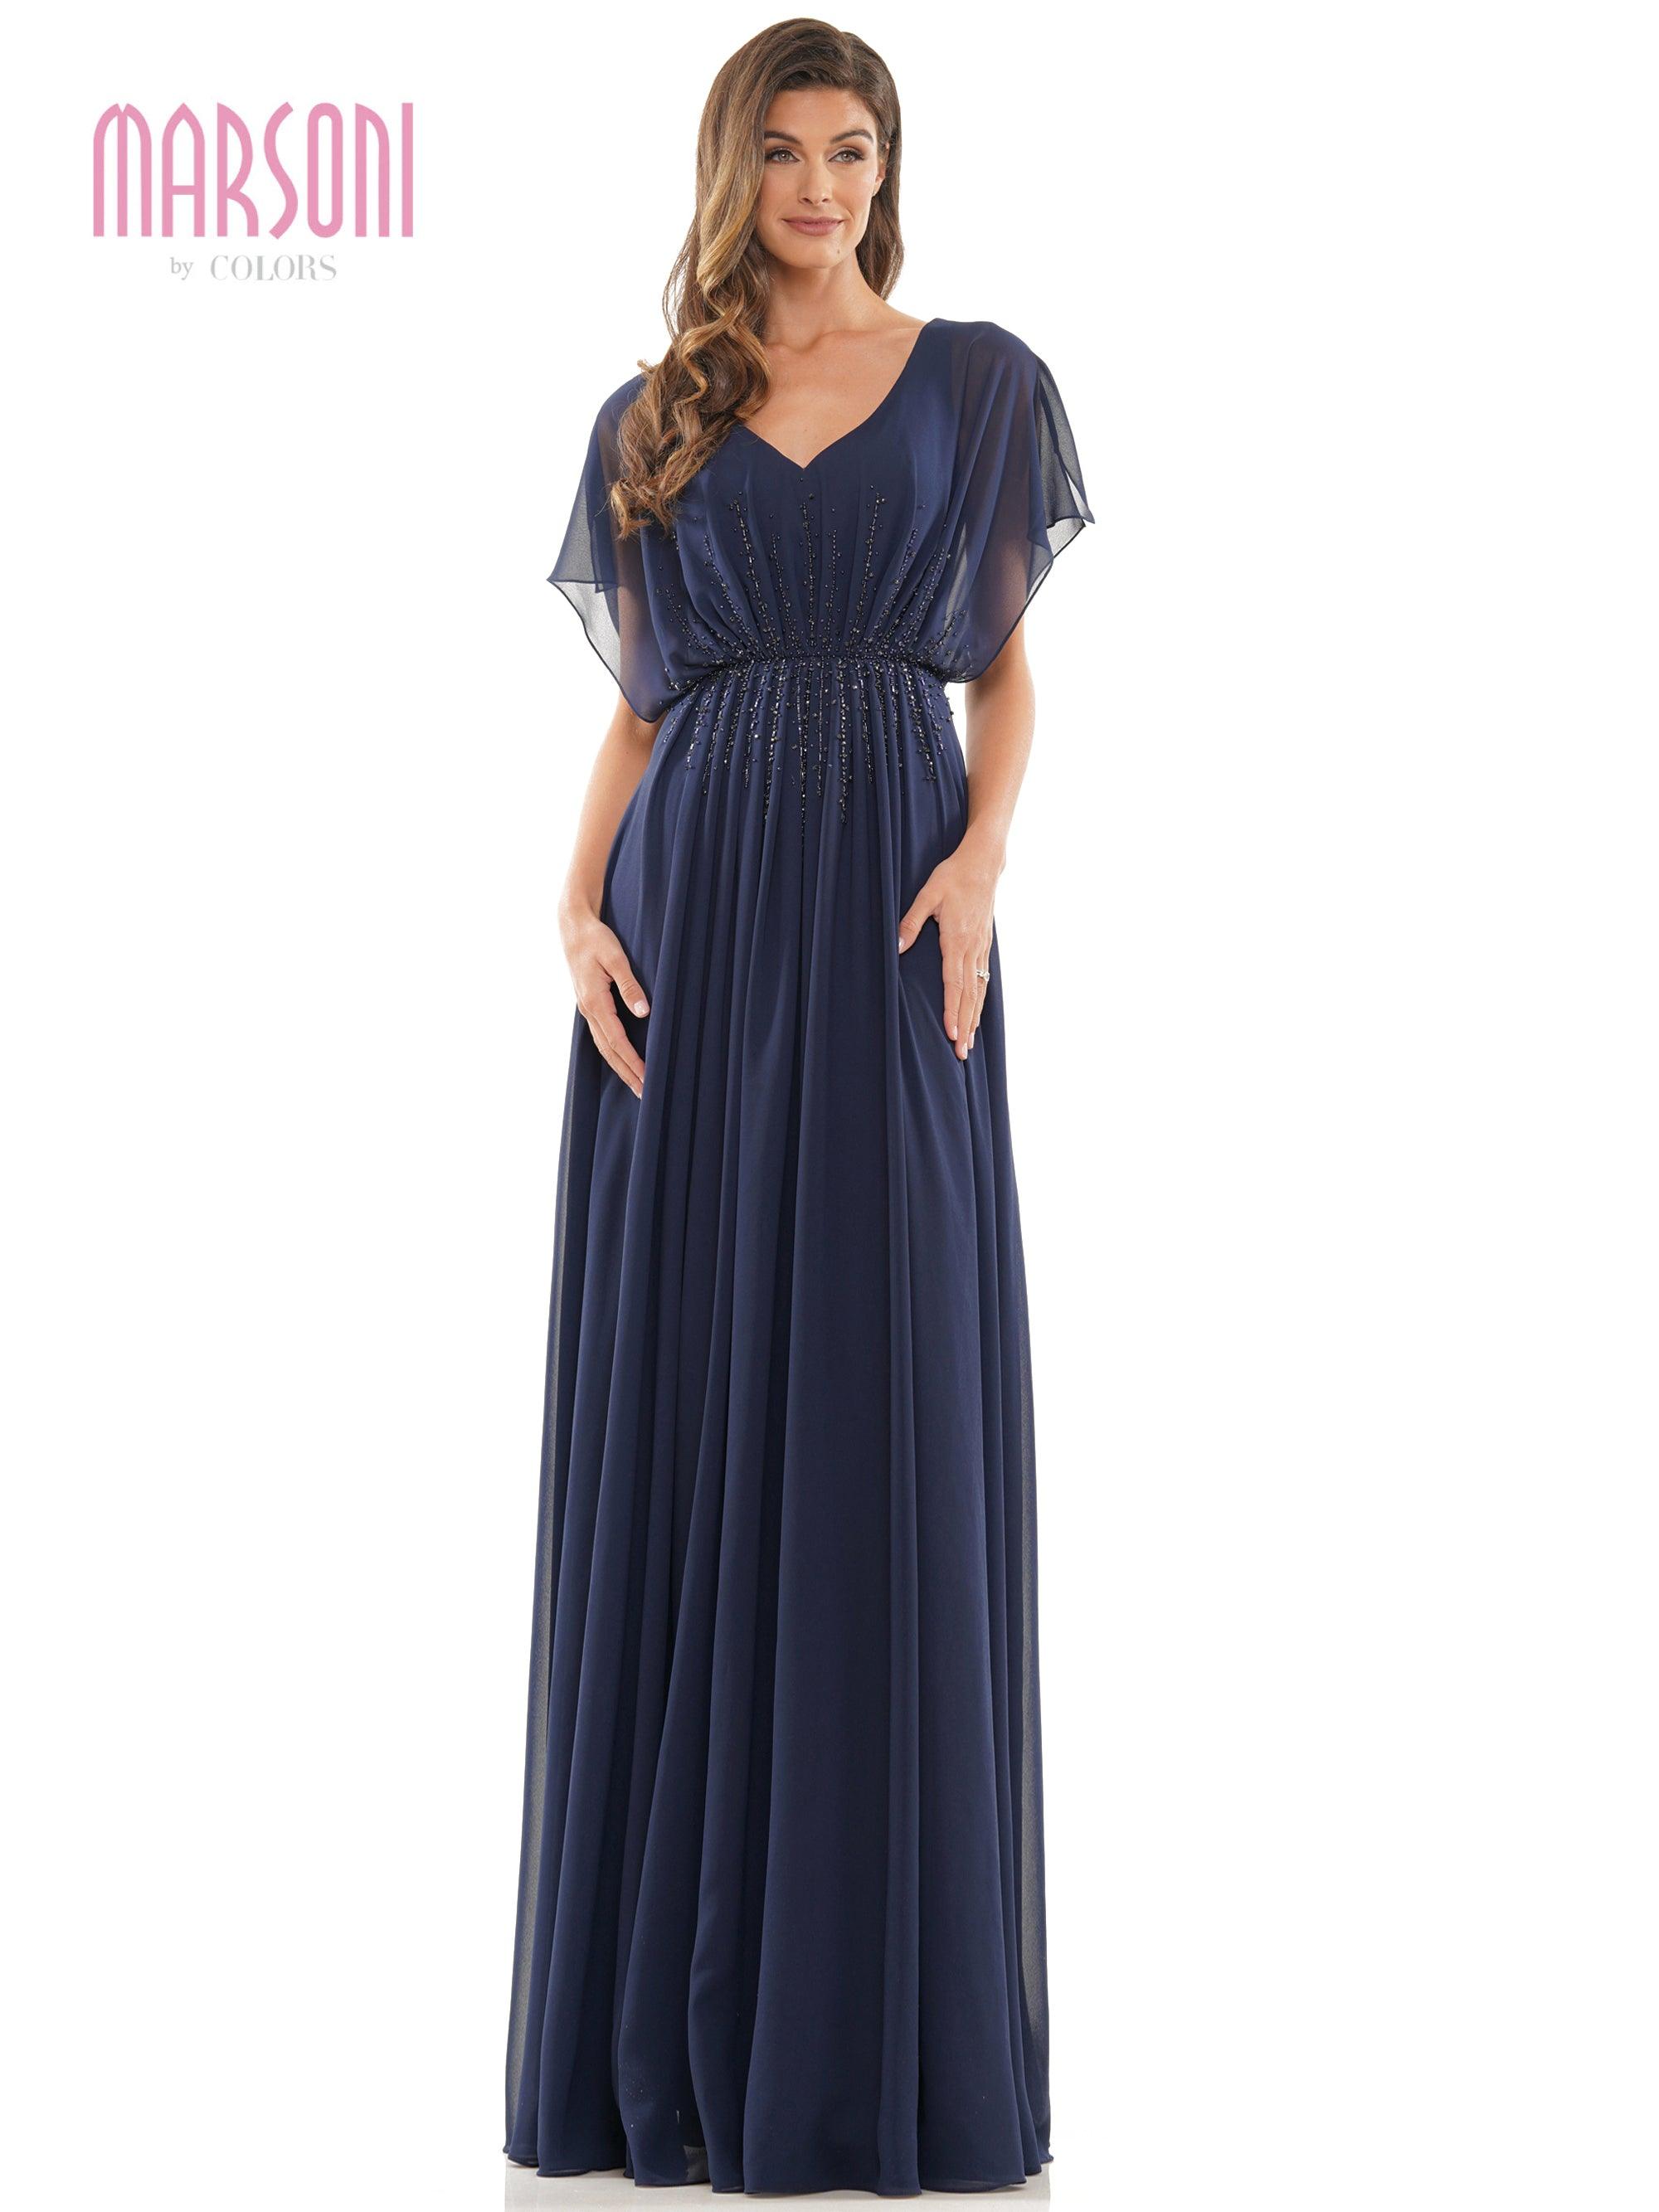 Marsoni Long Formal Mother of the Bride Gown 1156 - The Dress Outlet